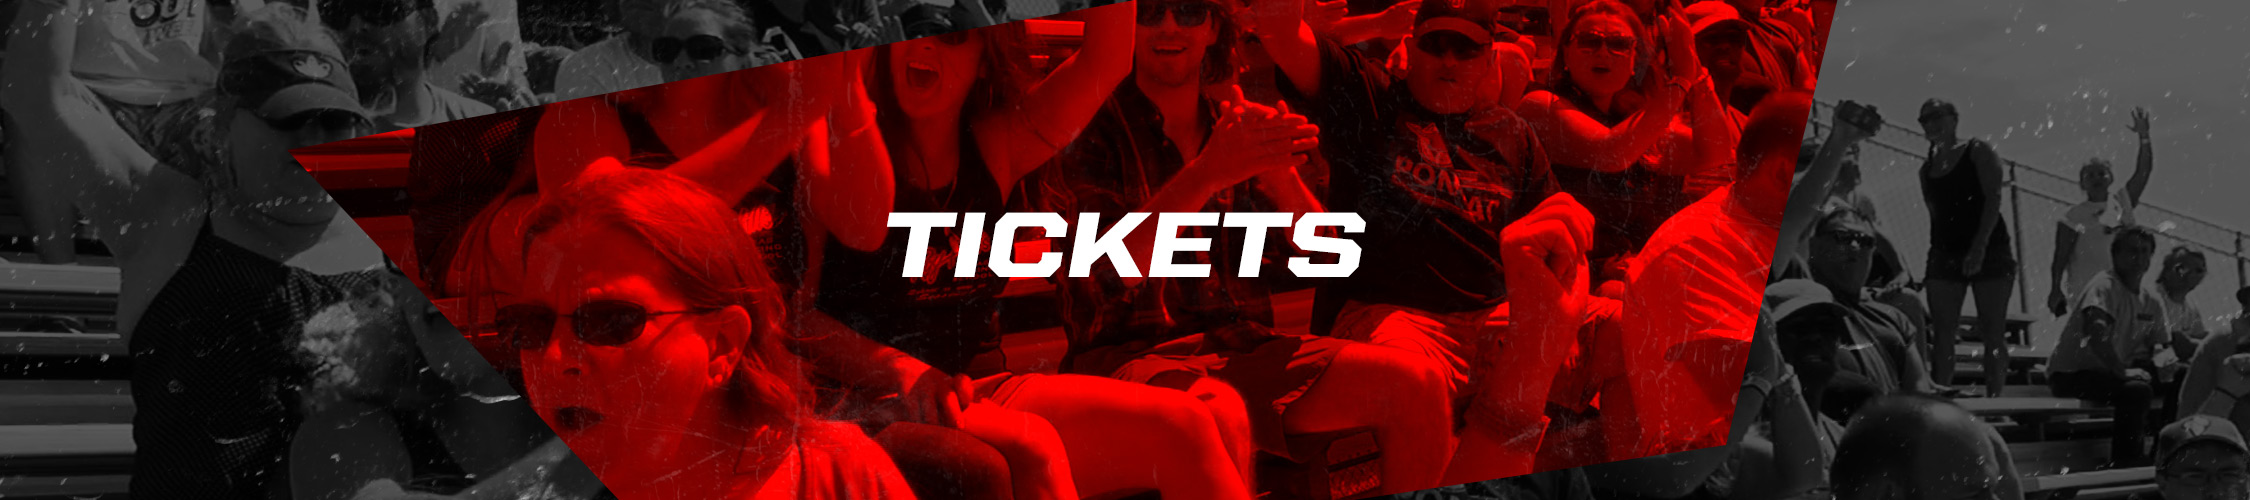 Racer Entry / Spectator Tickets